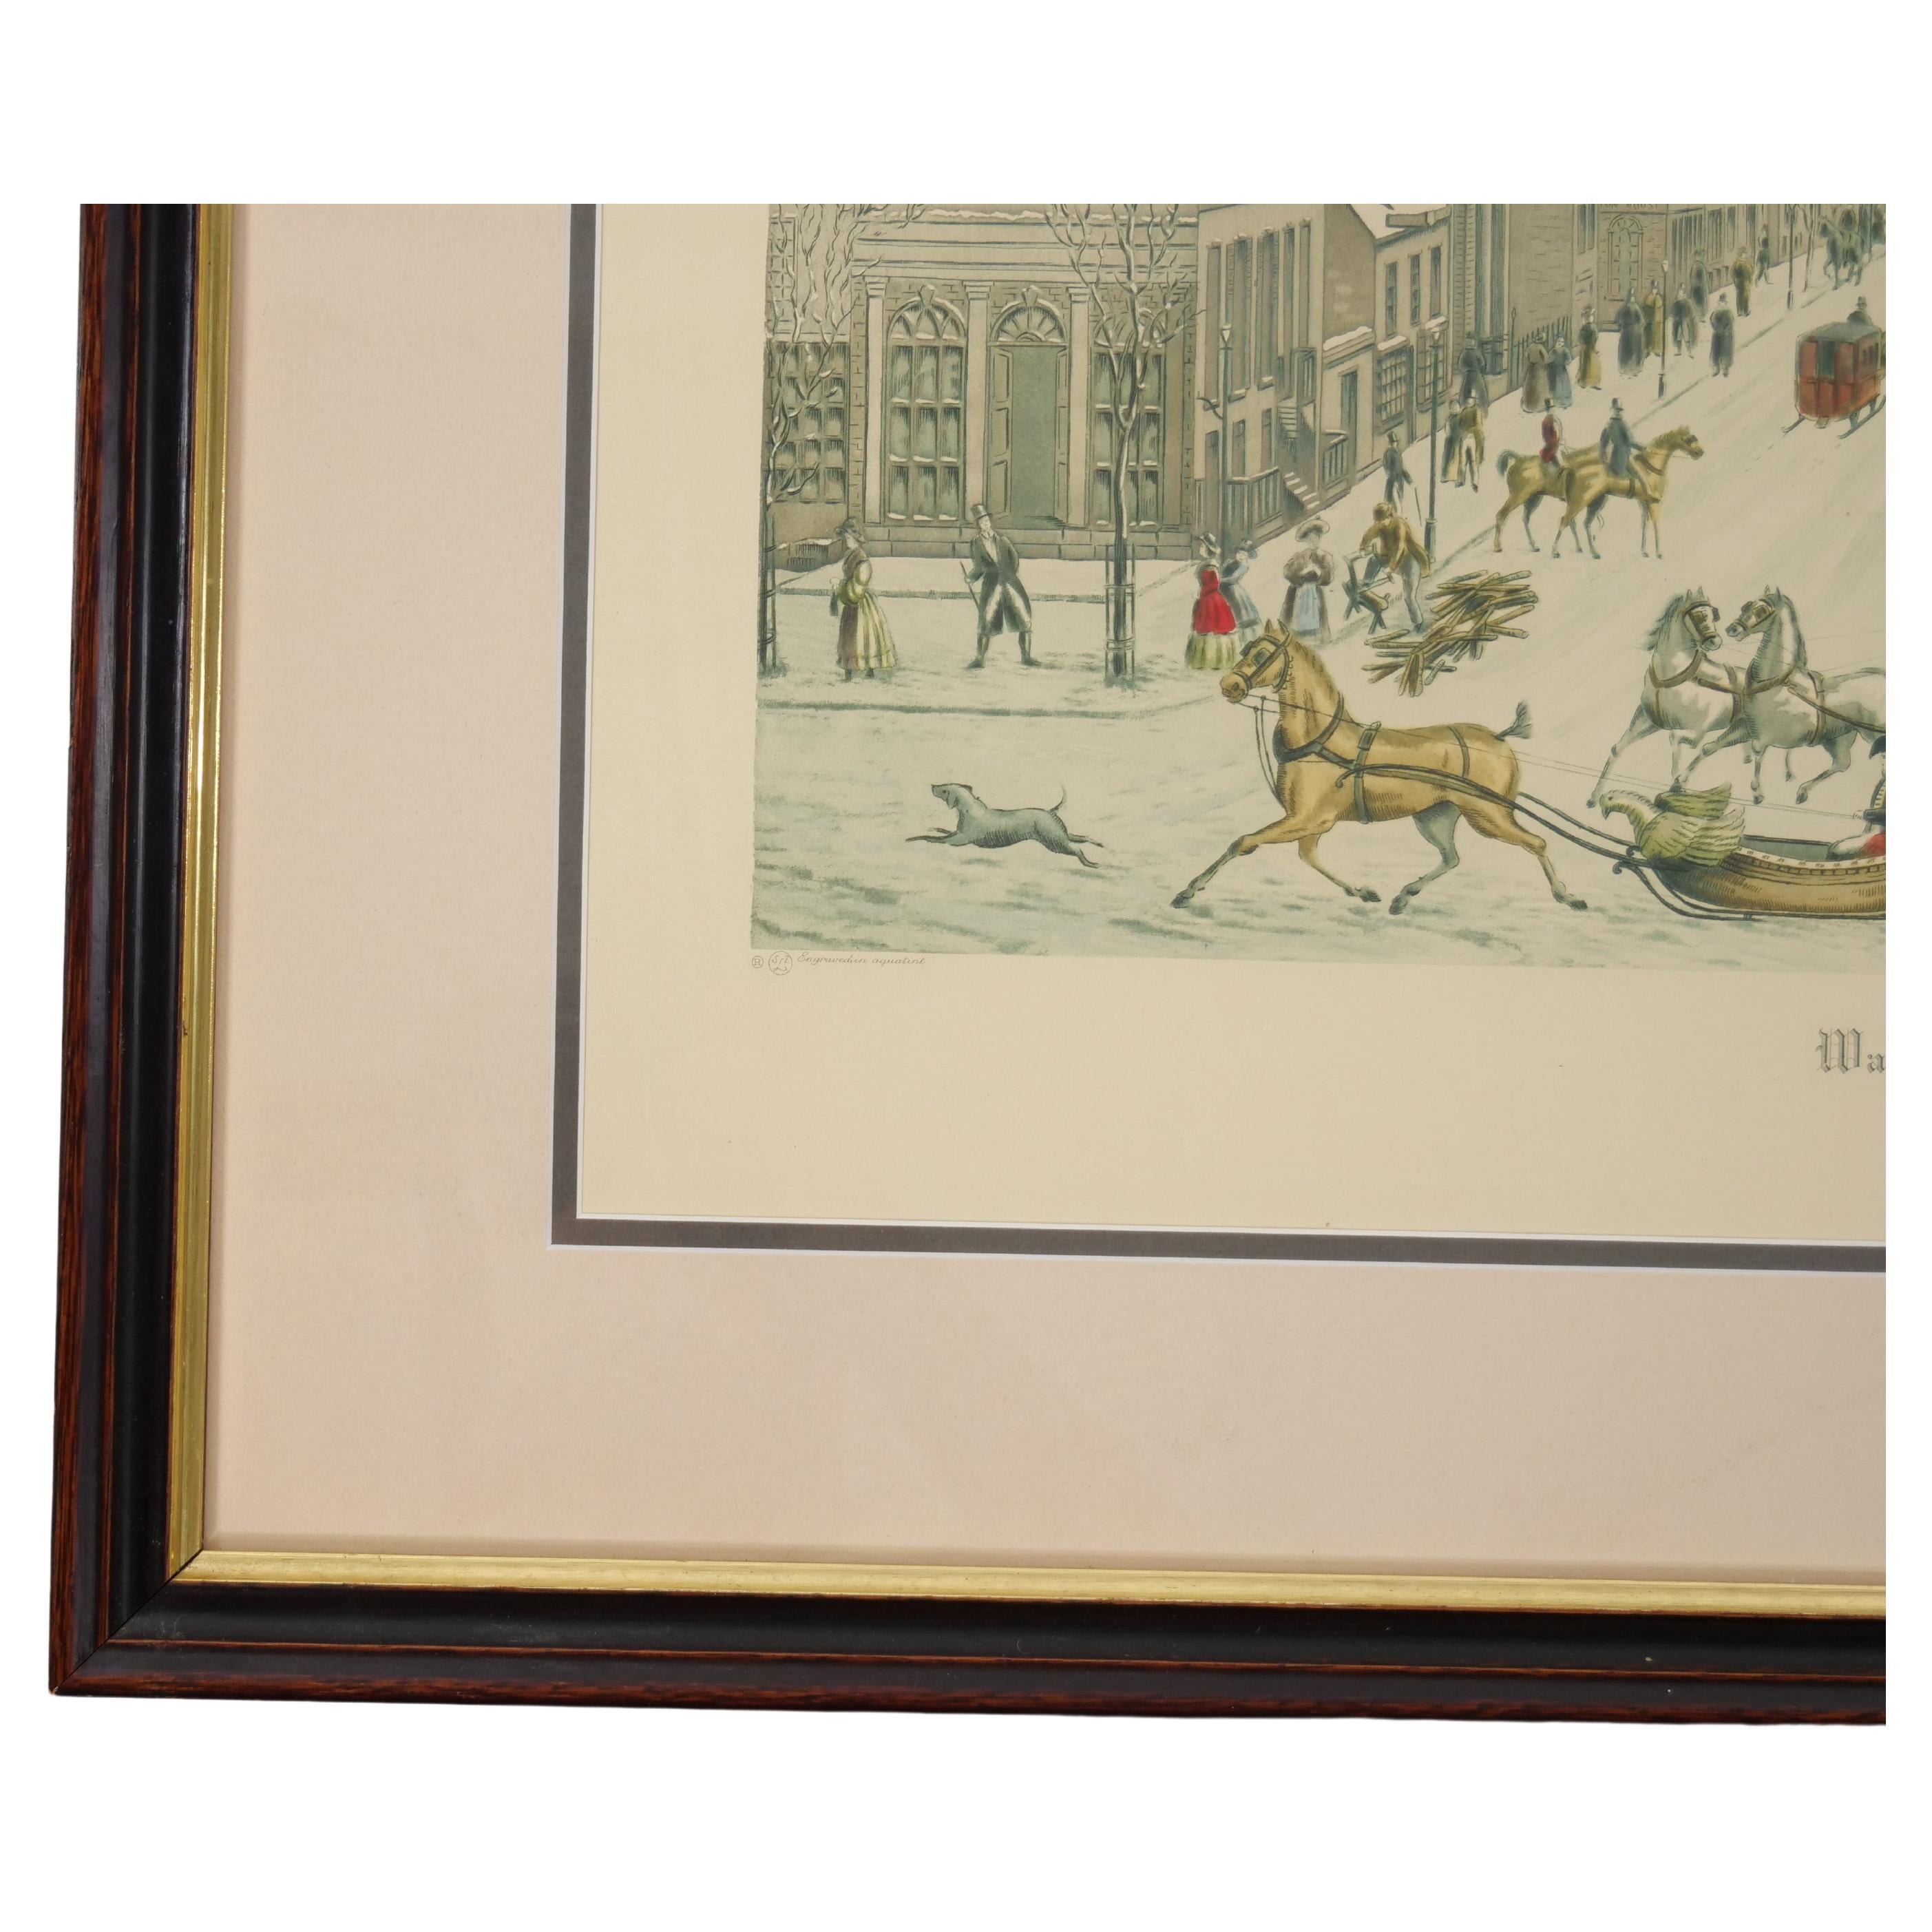 Engraved Wall Street 1834 Framed Aquatint Etching After Raoul Varin (1865-1943) For Sale